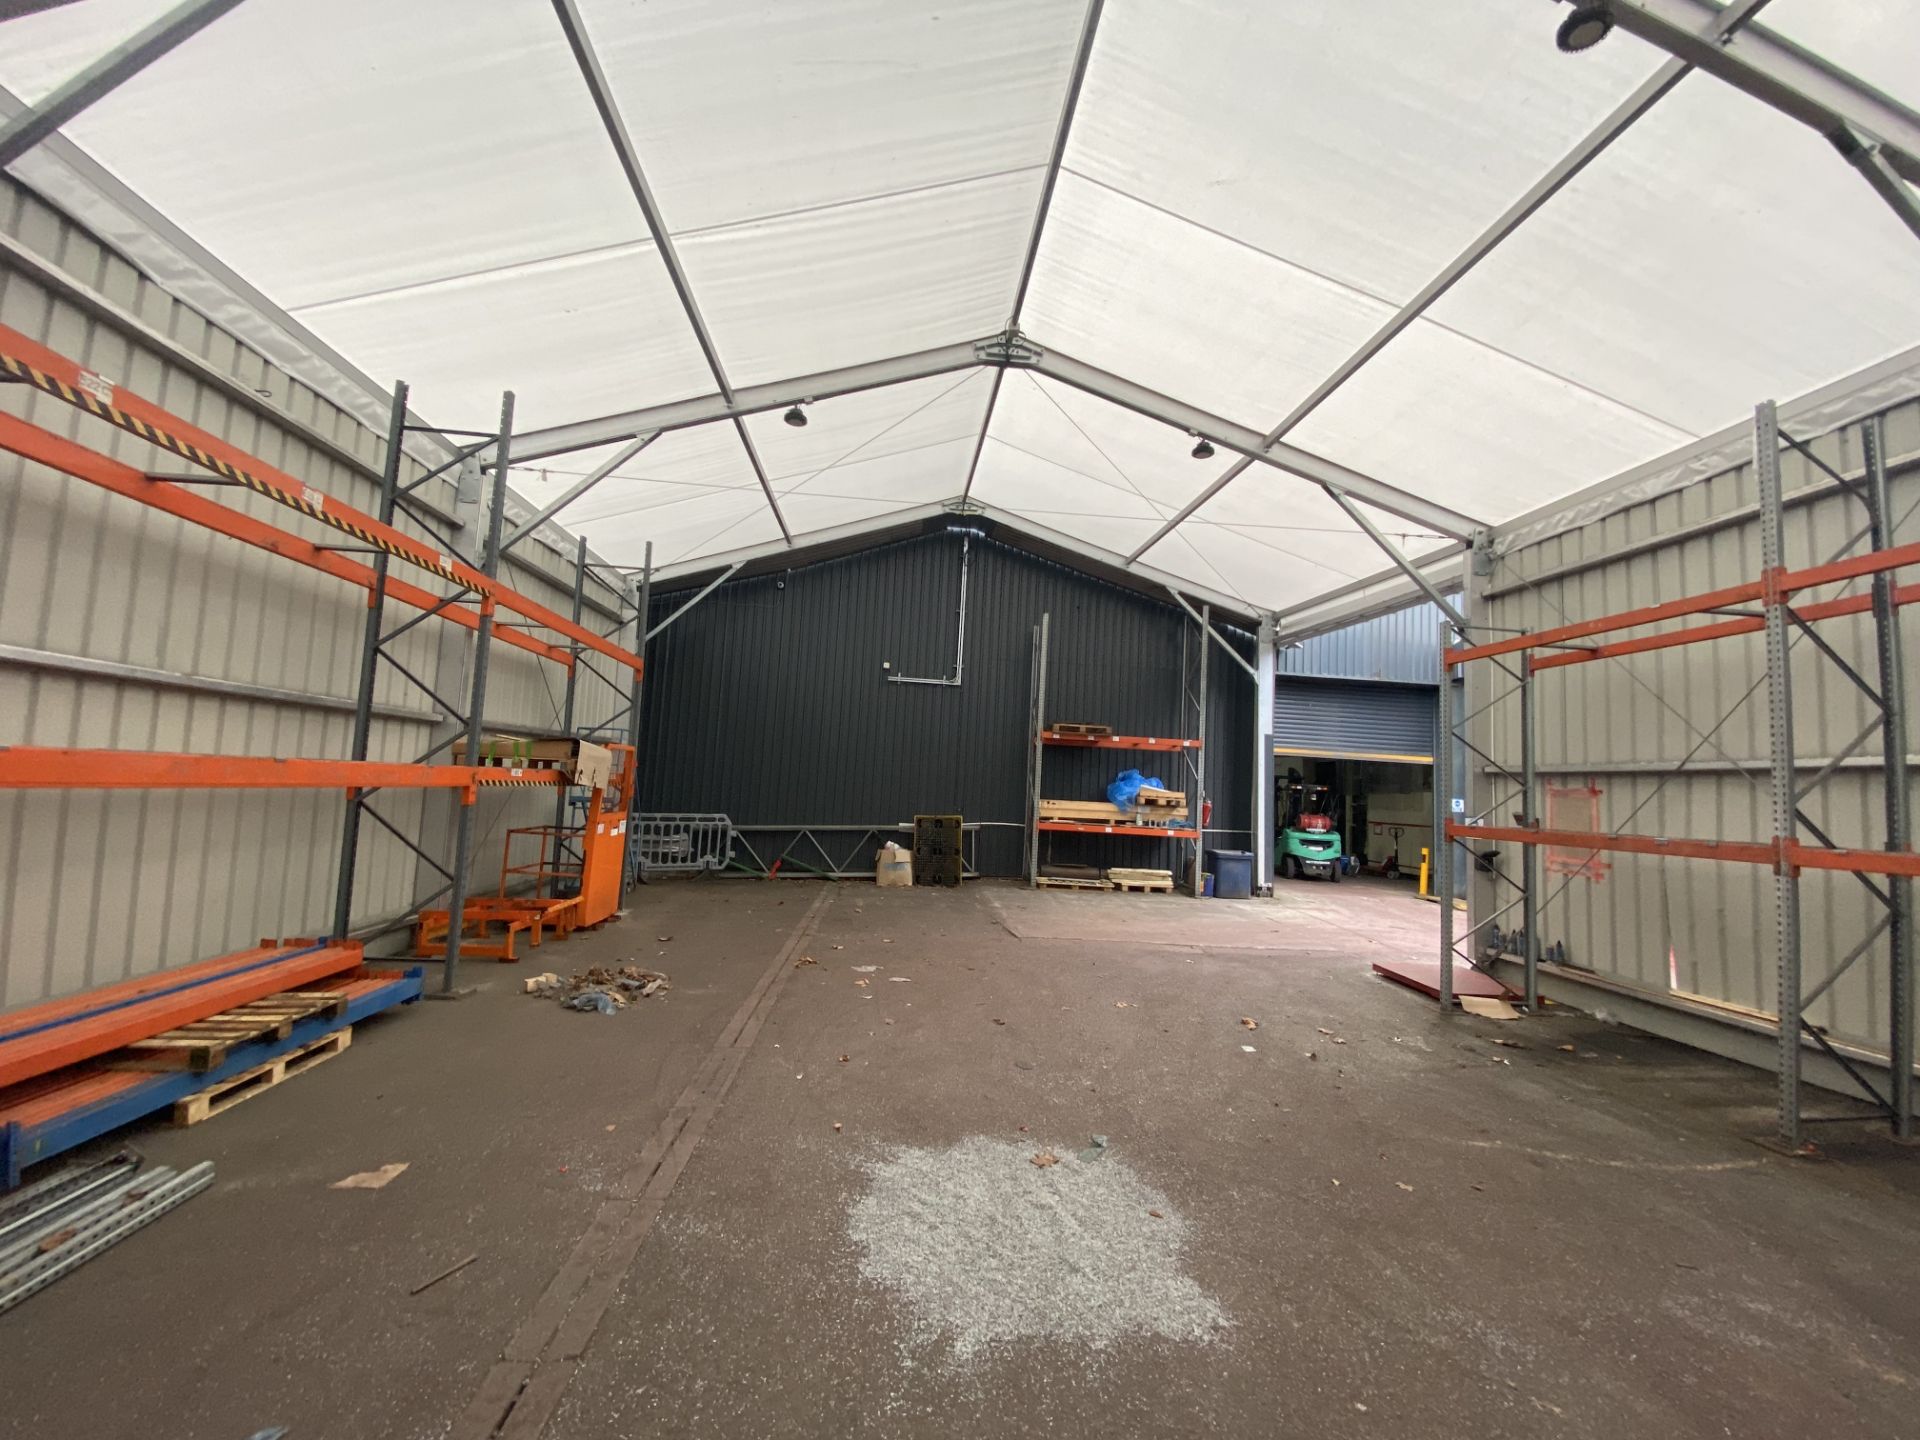 ALLOY PORTAL FRAMED TEMPORARY INDUSTRIAL BUILDING, approx. 16m x 10.7m x 4.8m high (eaves), 6.7m - Image 8 of 8